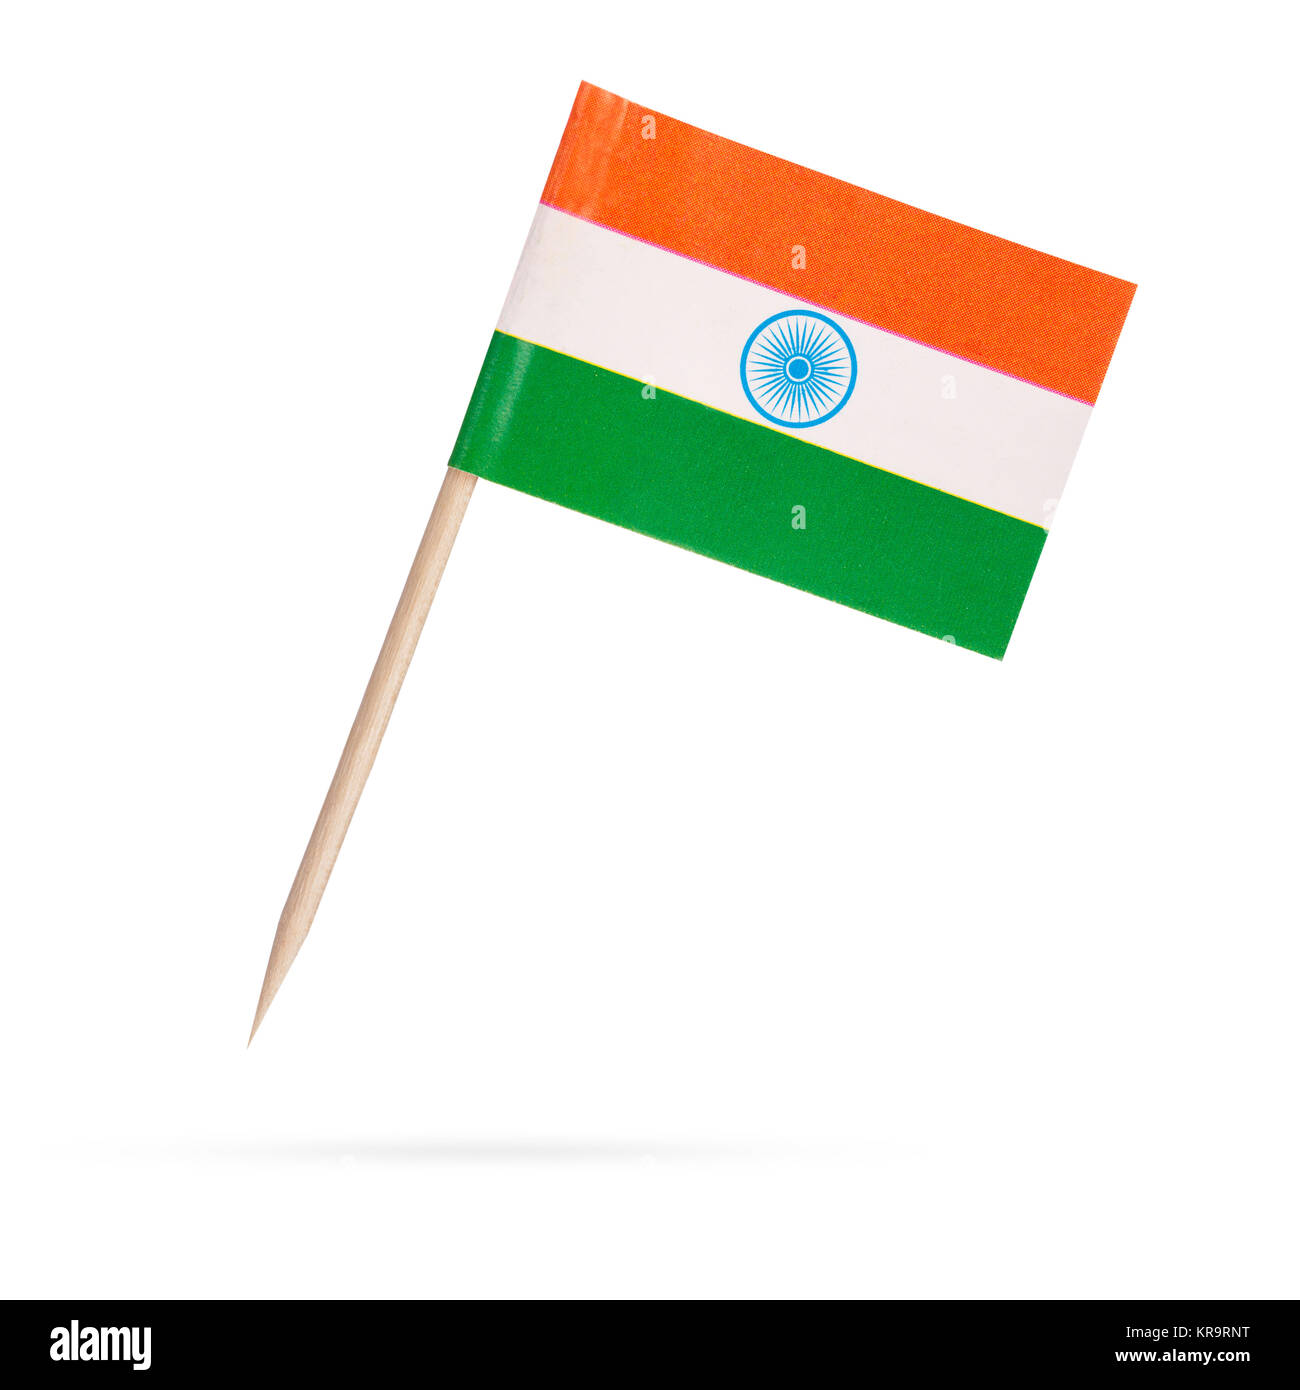 India flag on flag pole Cut Out Stock Images & Pictures - Alamy